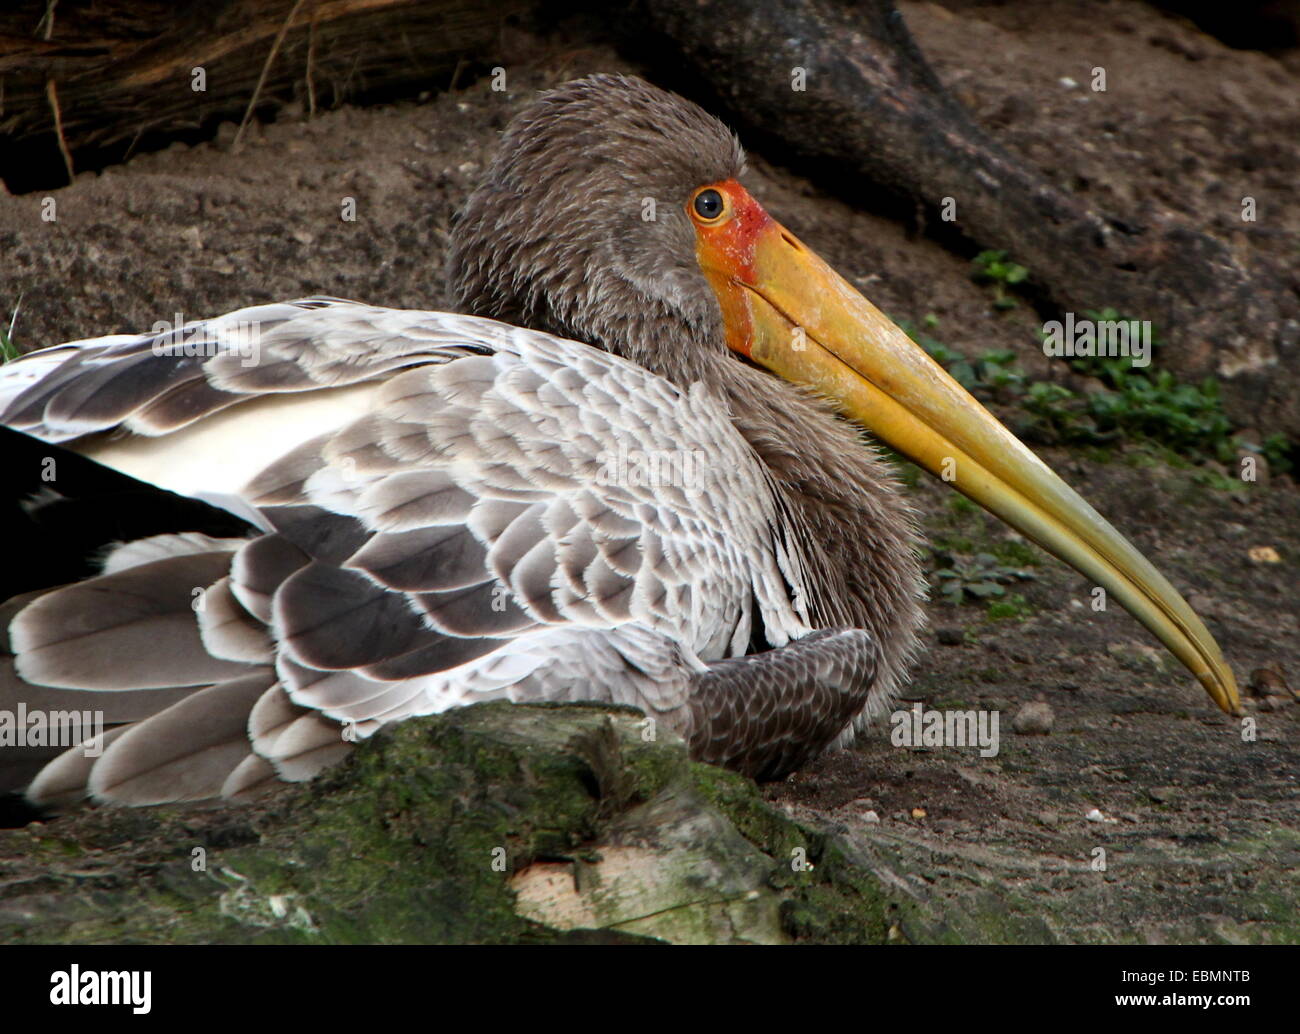 Juvenile Yellow-billed stork (Mycteria ibis) resting while lying on th ground Stock Photo